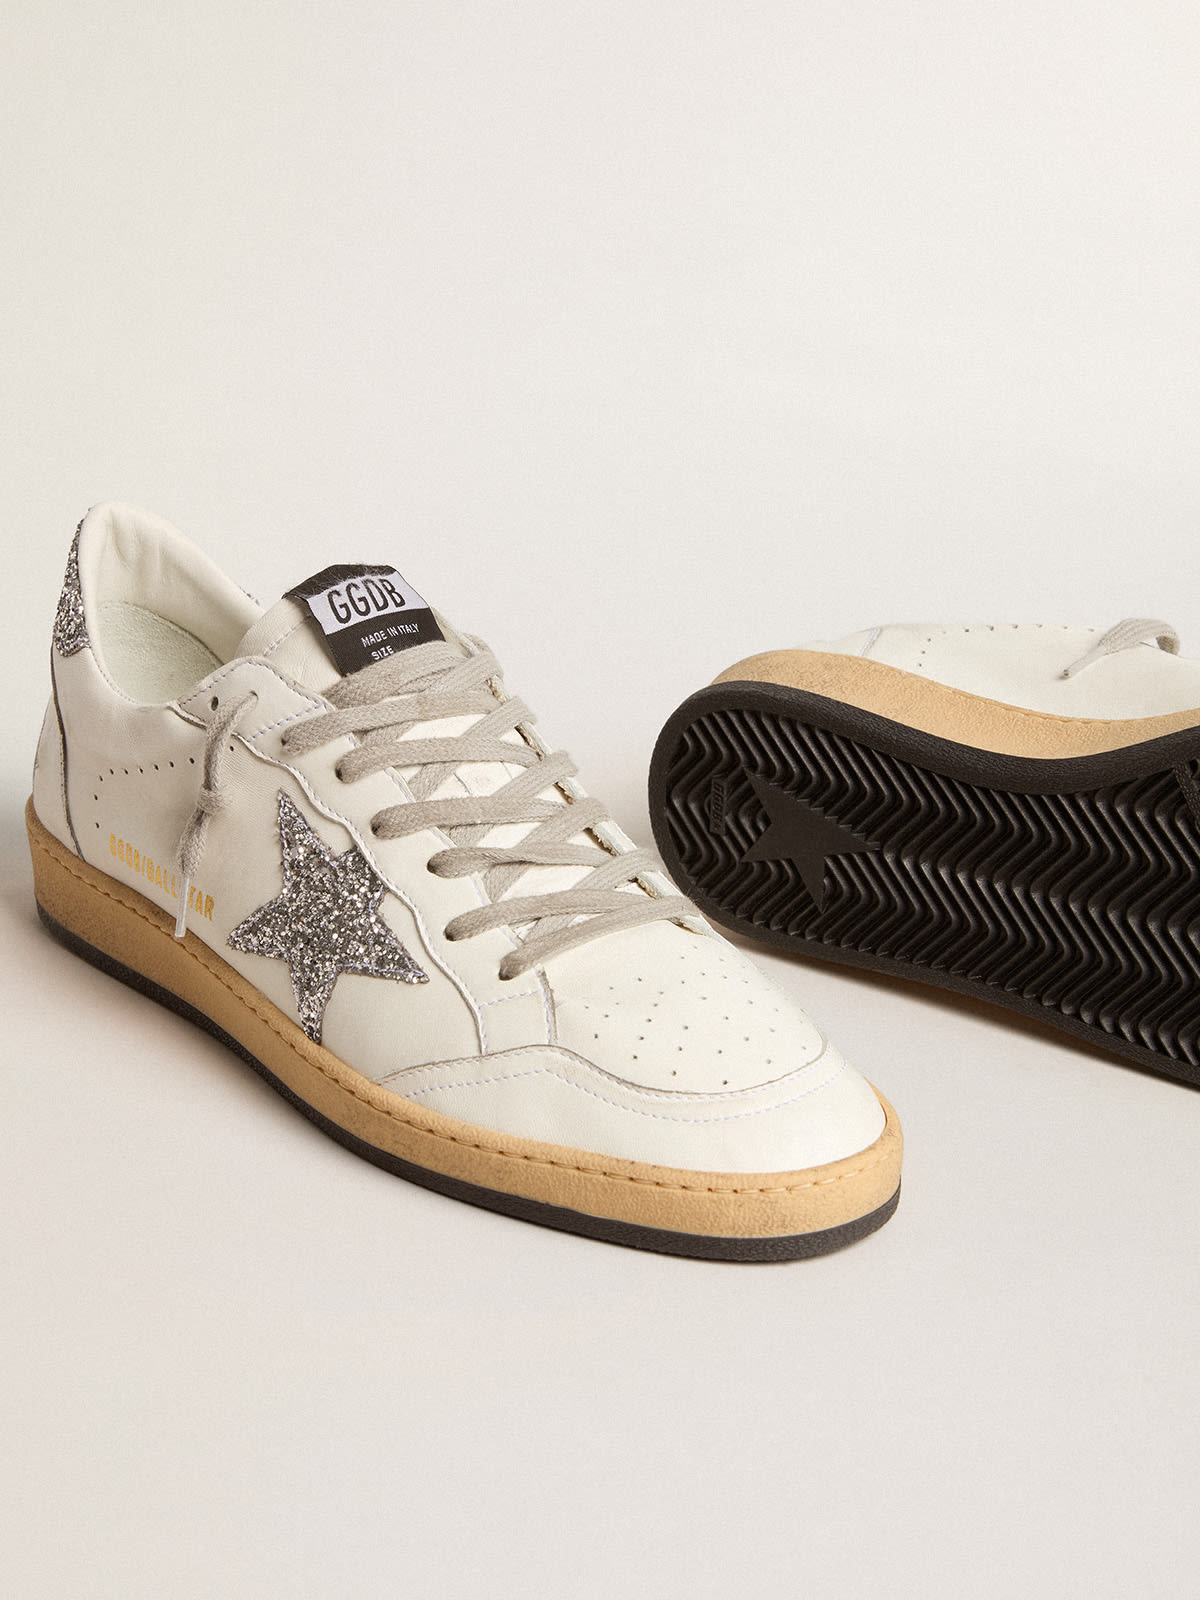 Golden Goose - Men’s Ball Star Wishes in nappa leather with glitter star and heel tab in 